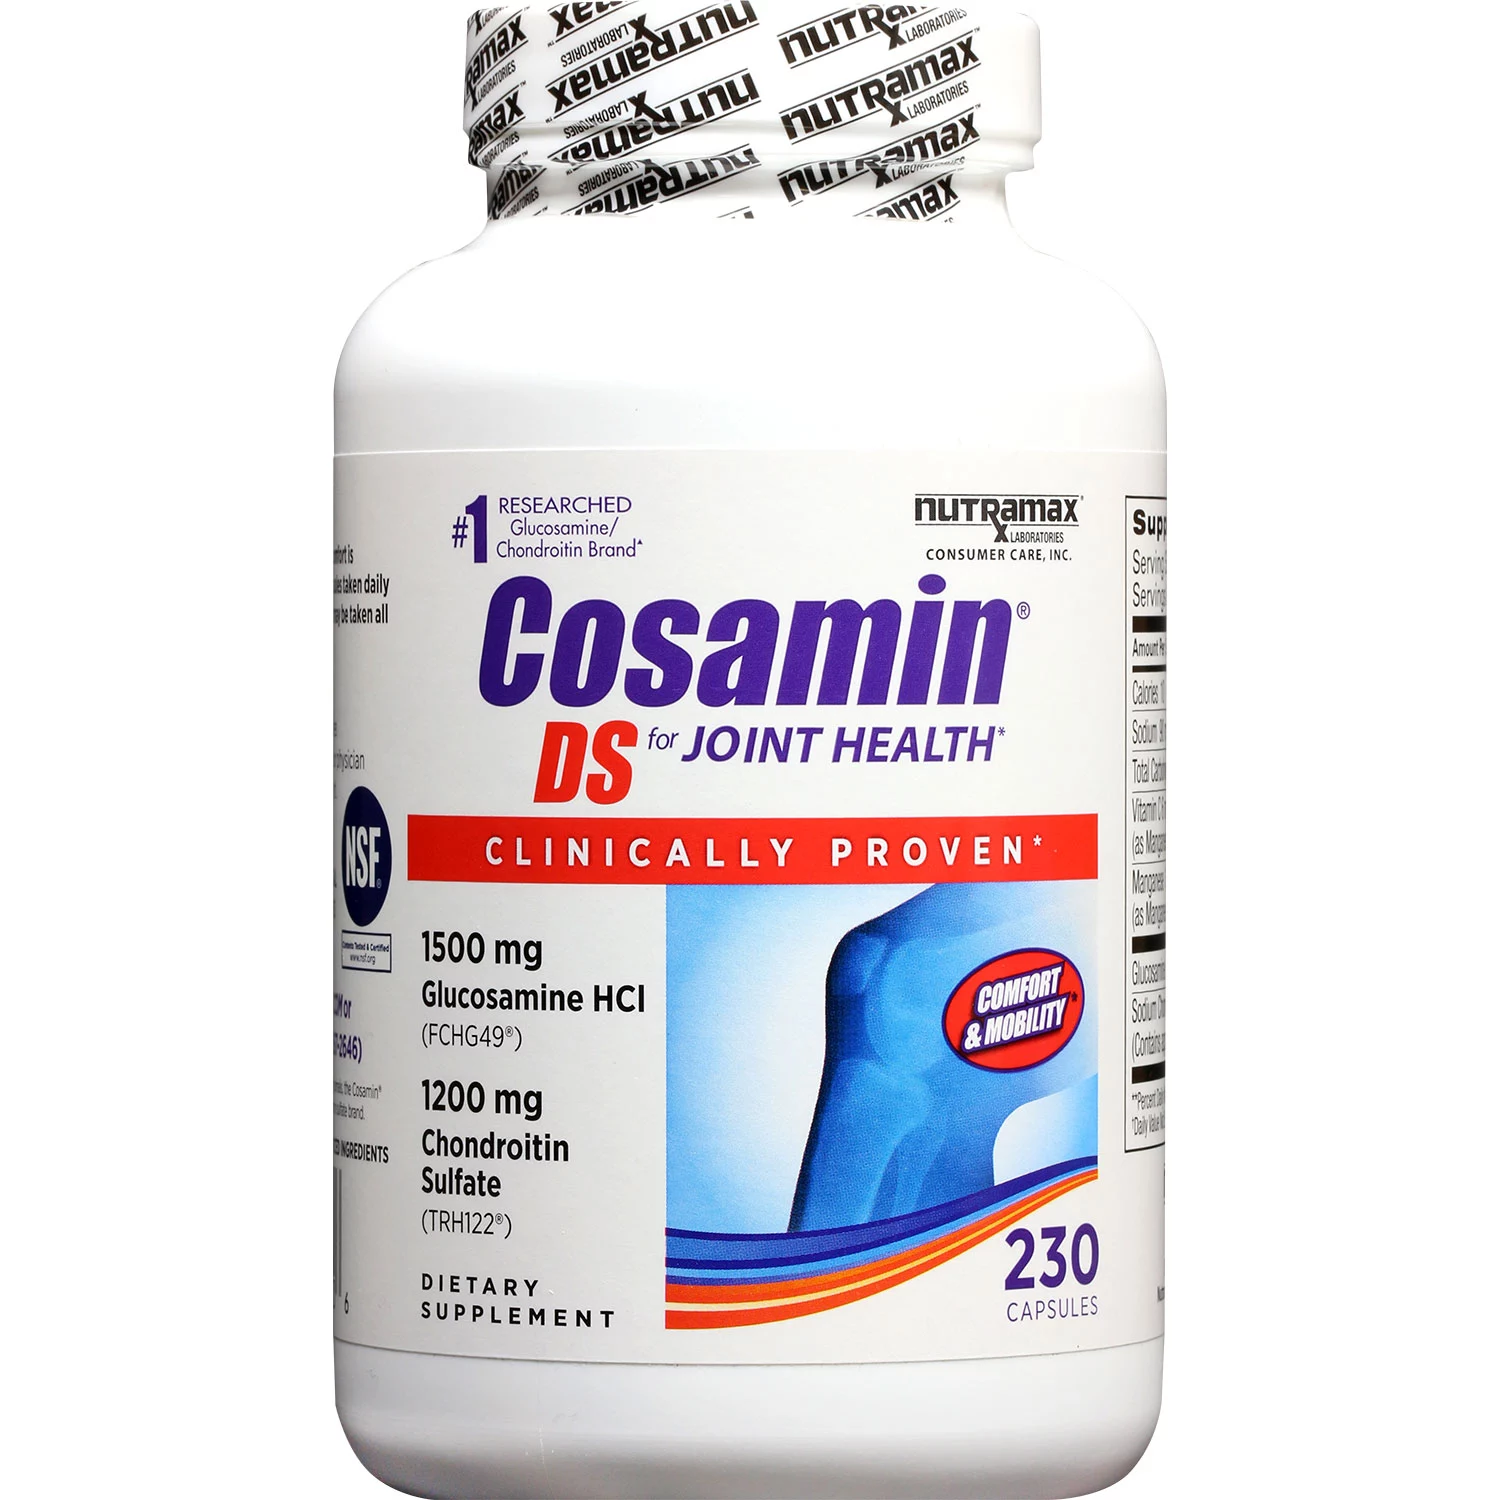 Cosamin DS Capsules for Joint Health (230 ct.)